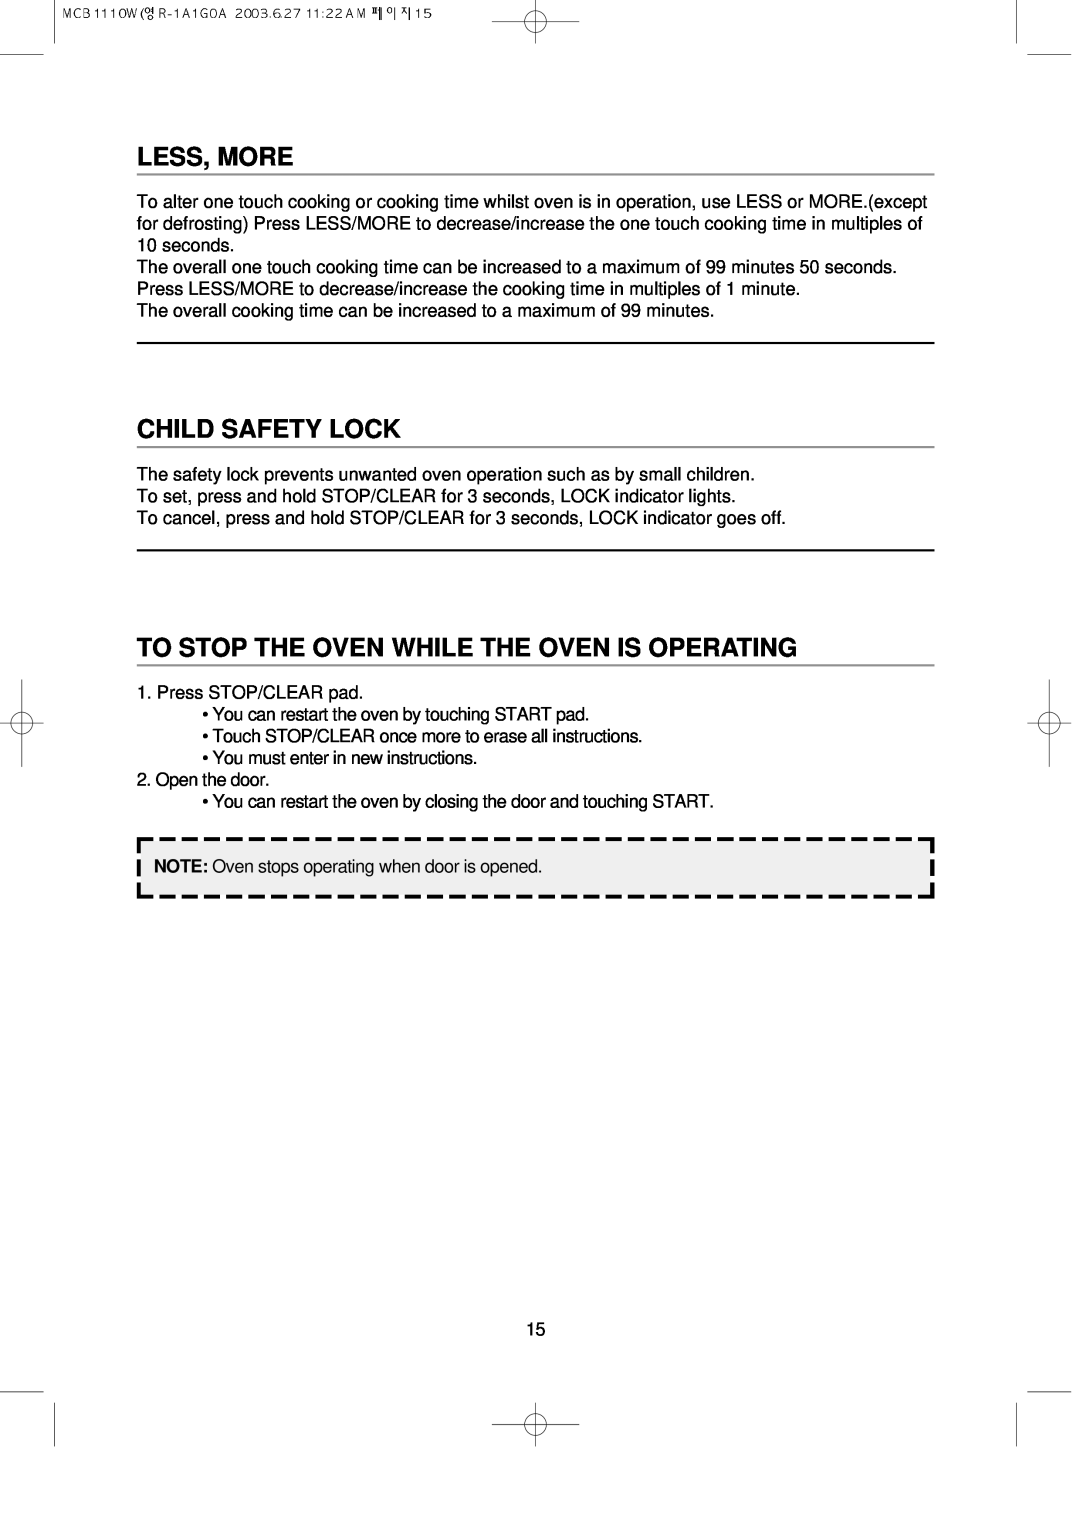 Magic Chef MCB1110W instruction manual Less, More, Child Safety Lock, To Stop The Oven While The Oven Is Operating 